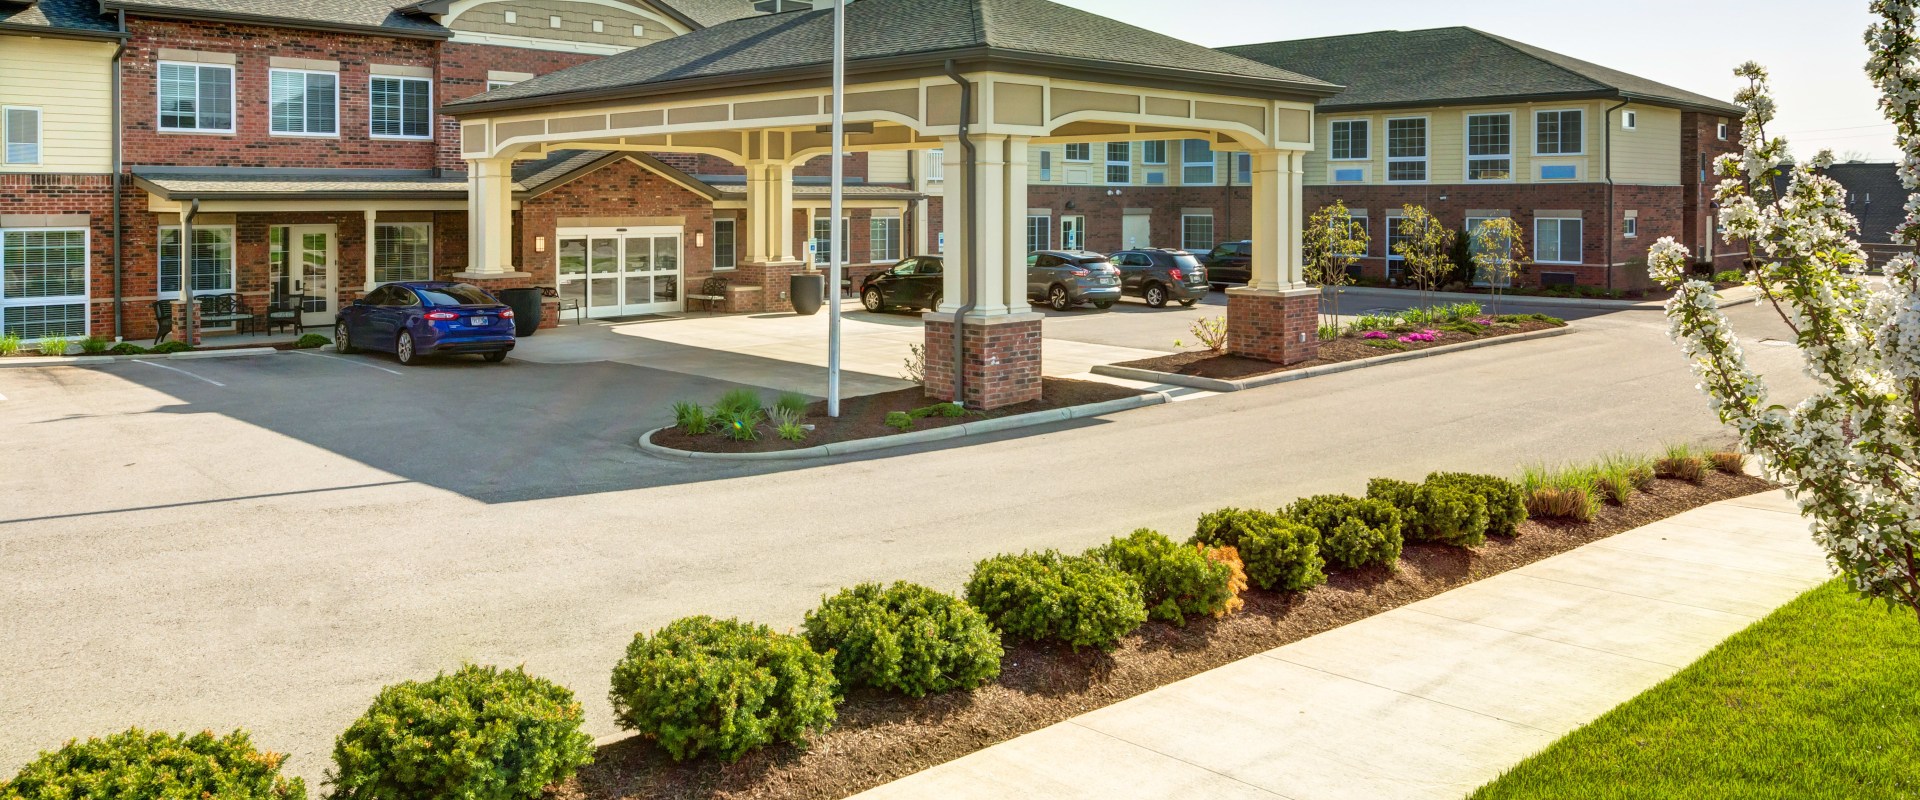 The Healthcare Landscape in West Chester Township, OH